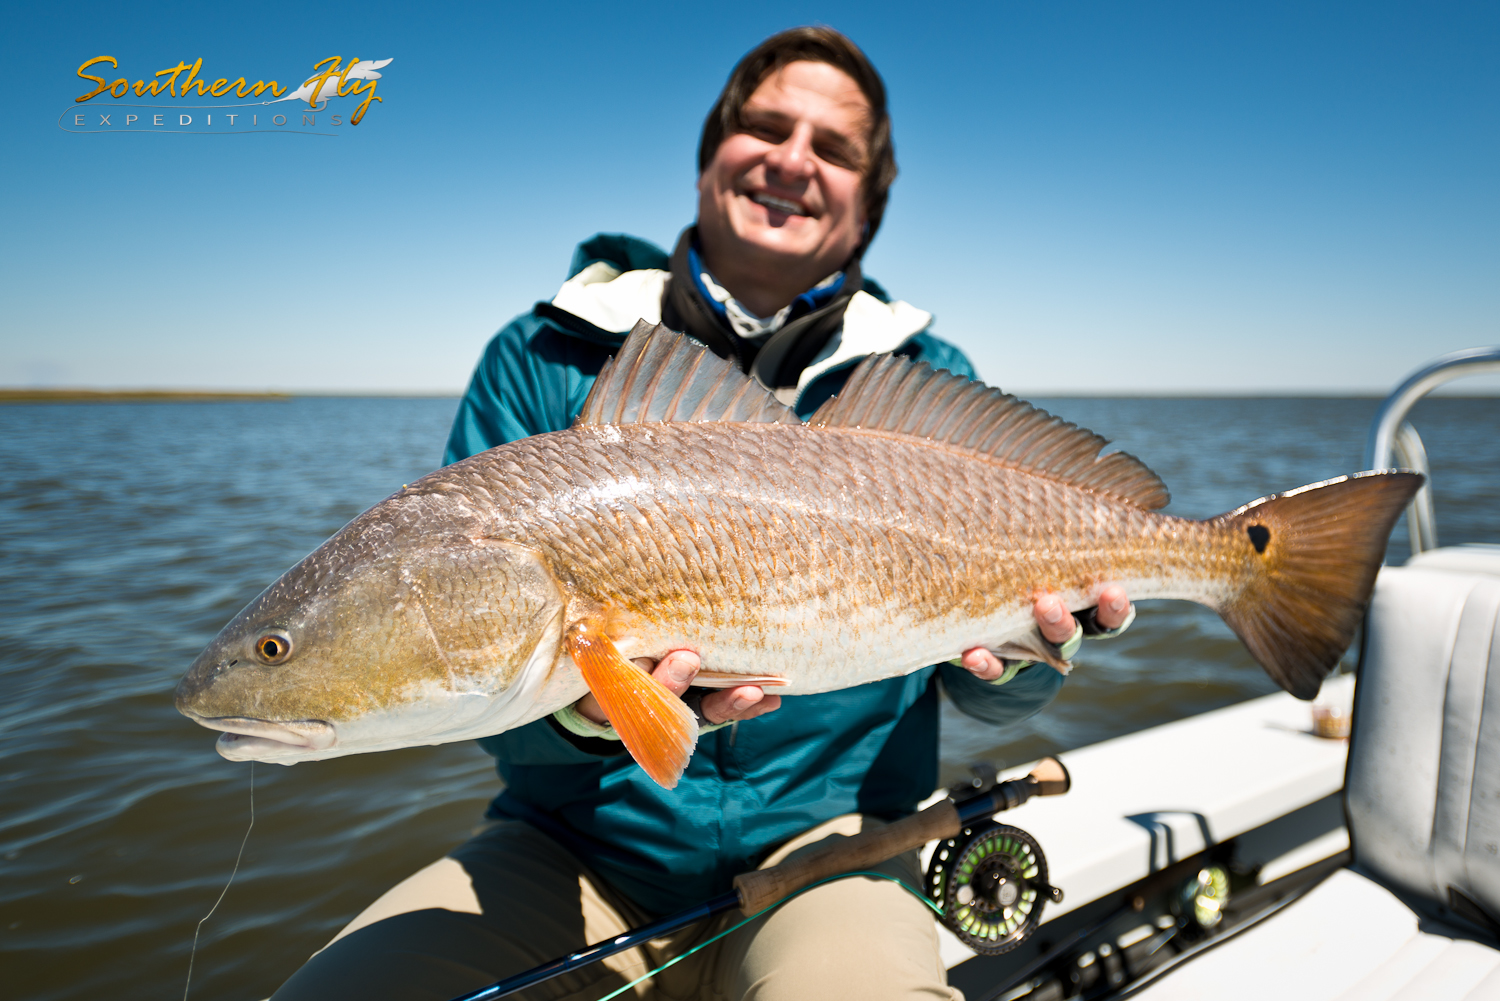 fly fishing vacation in new orleans louisiana southern fly expeditions 